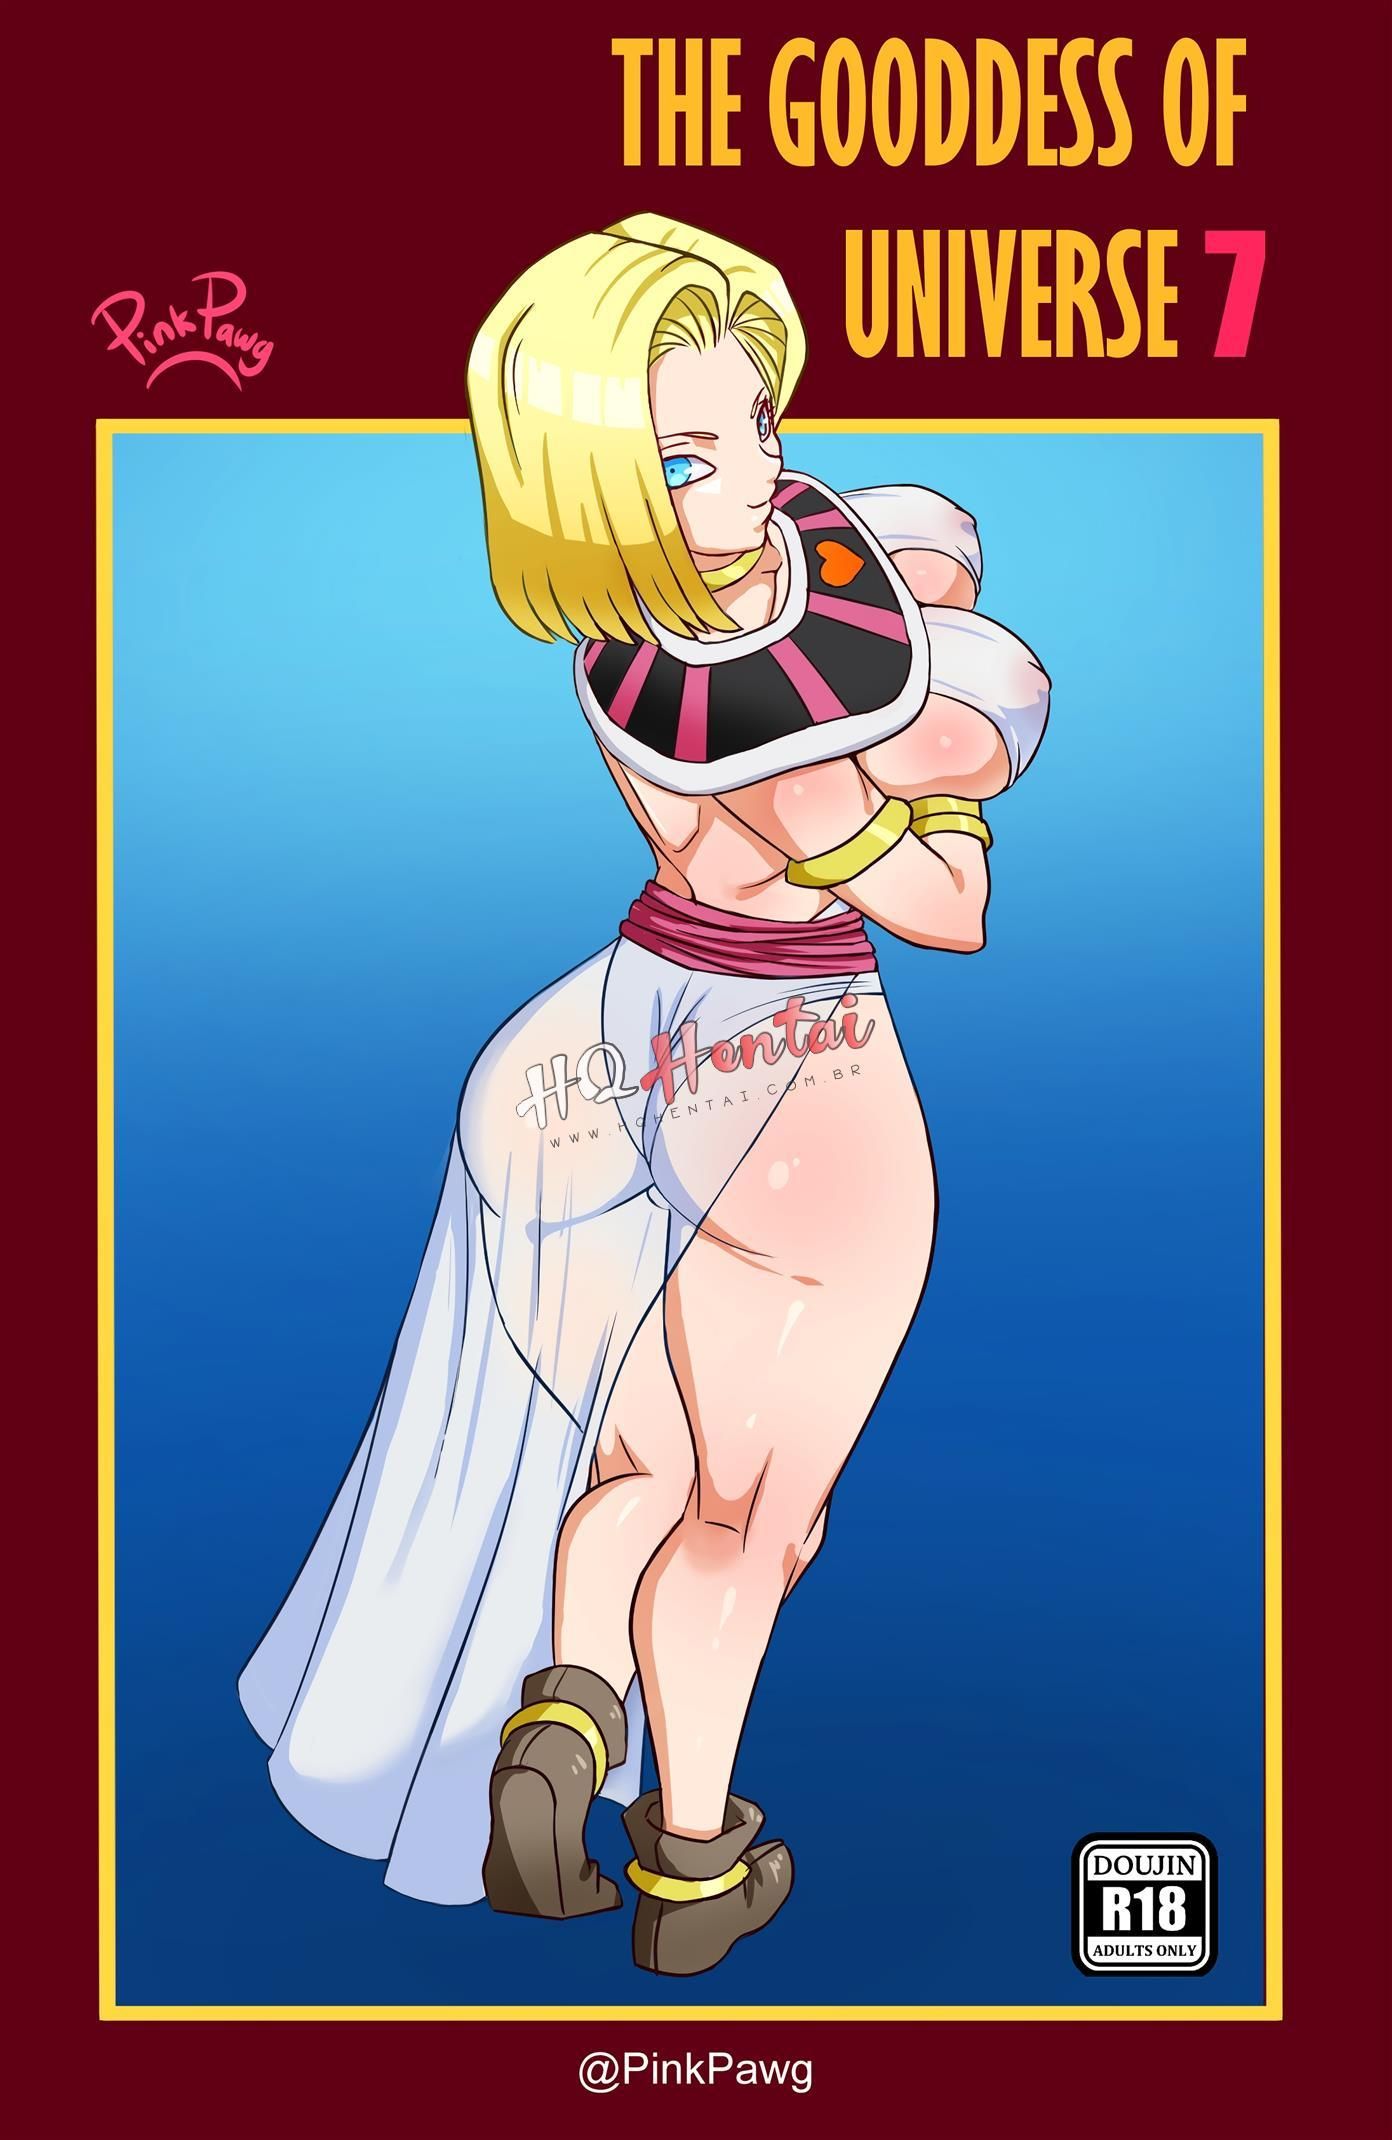 The goddess of universe 7